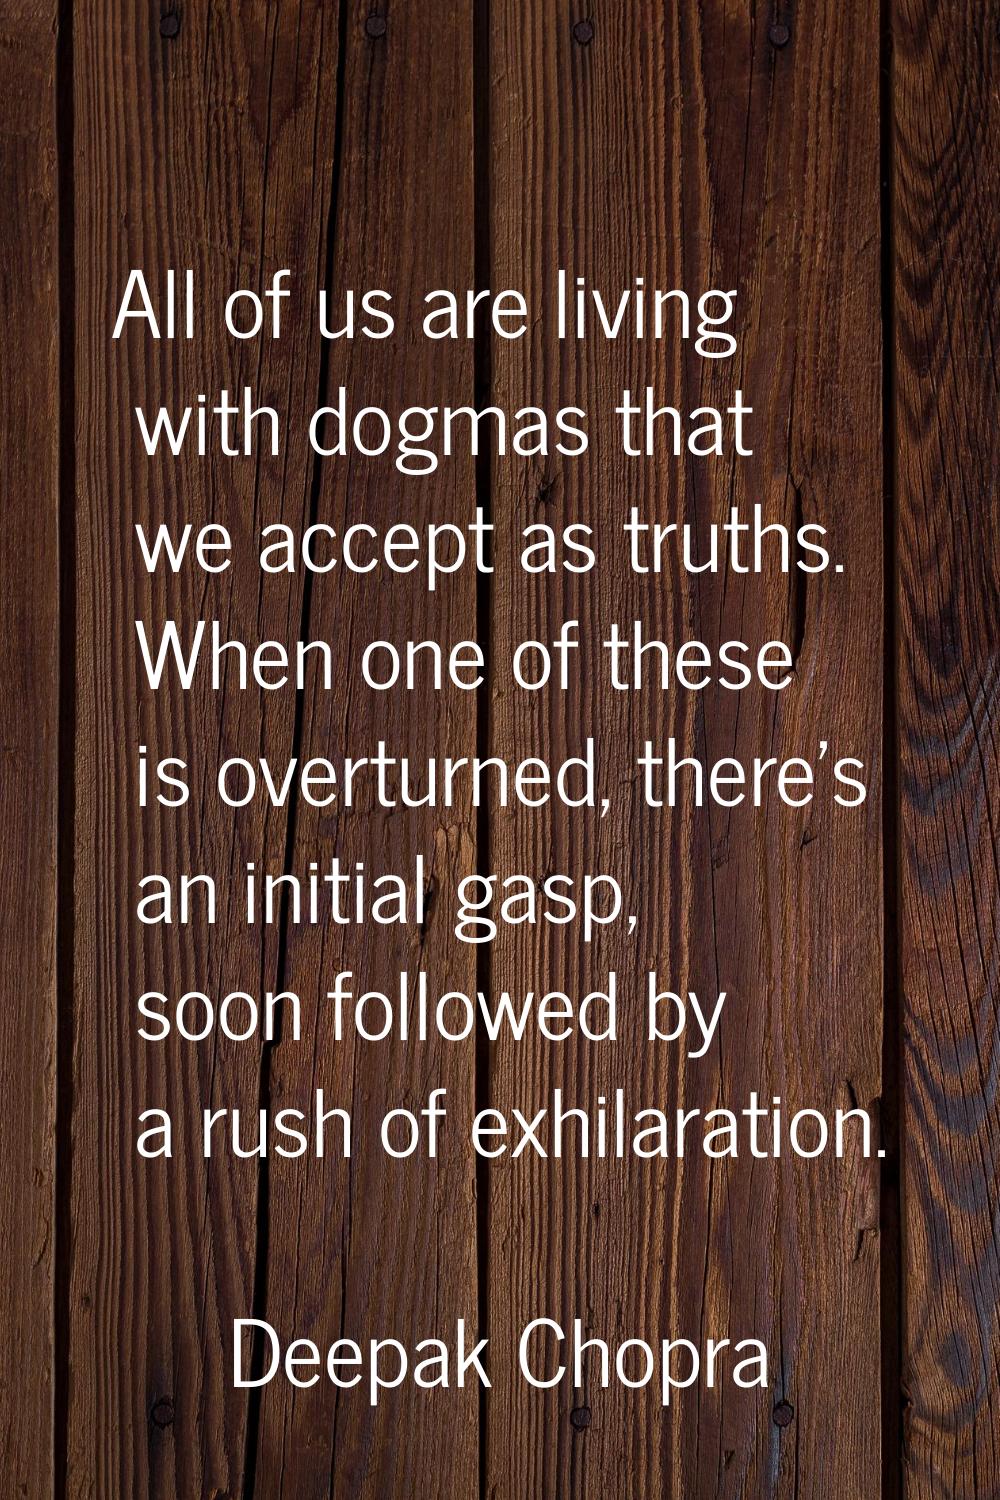 All of us are living with dogmas that we accept as truths. When one of these is overturned, there's